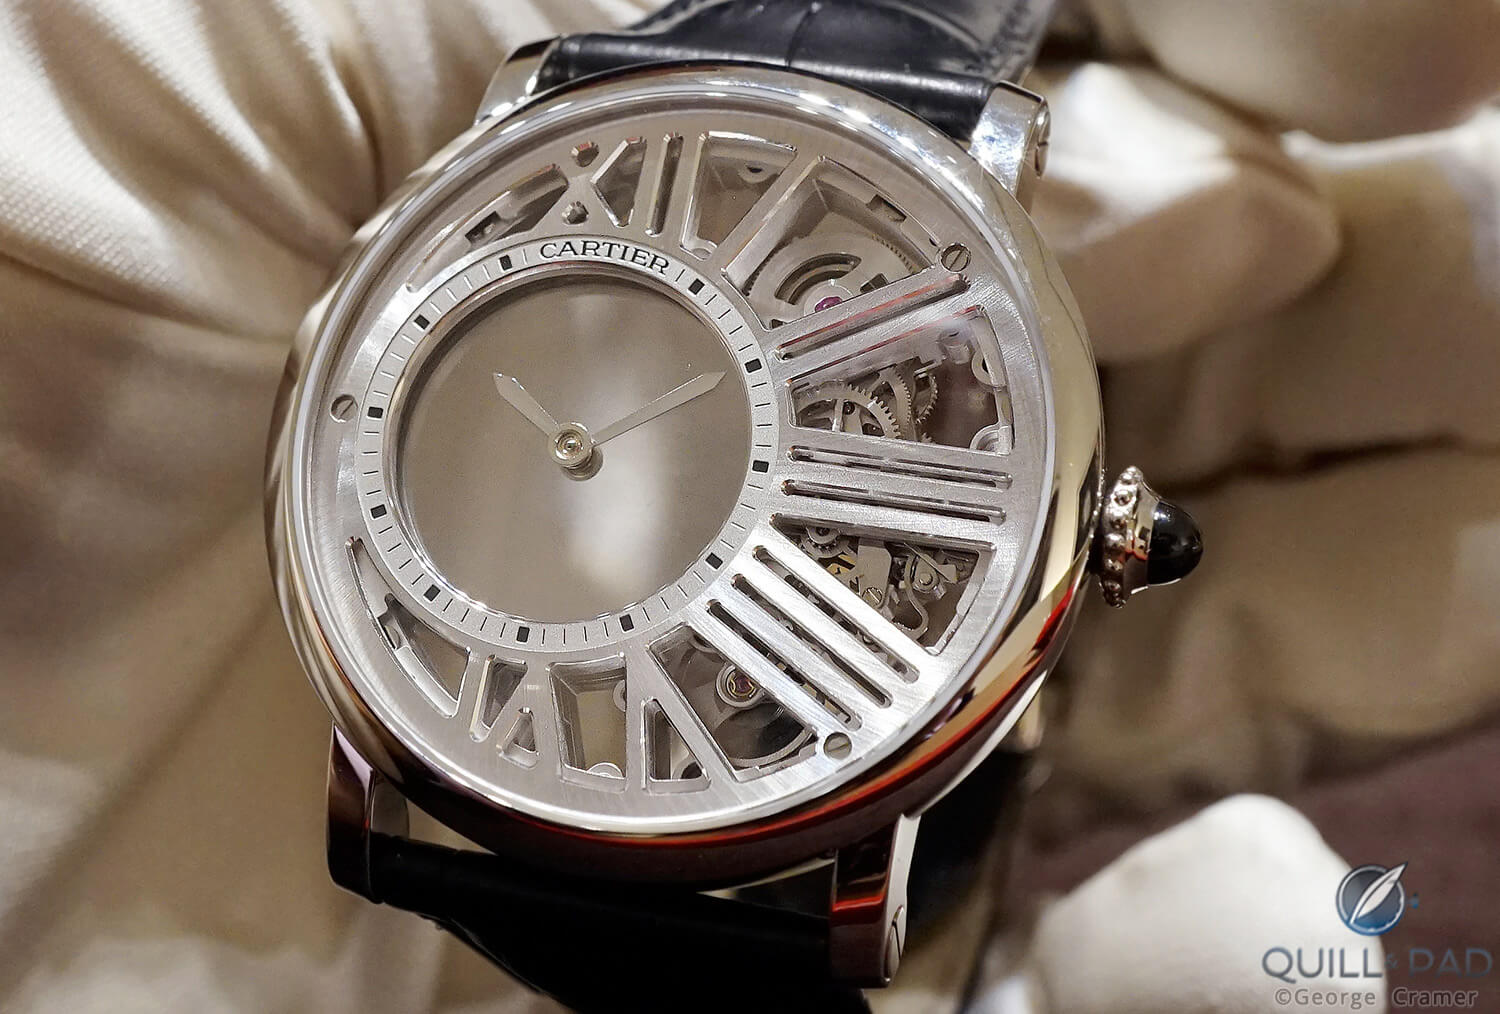 Cartier Rotonde Skeleton from the Fine Watch Making collection